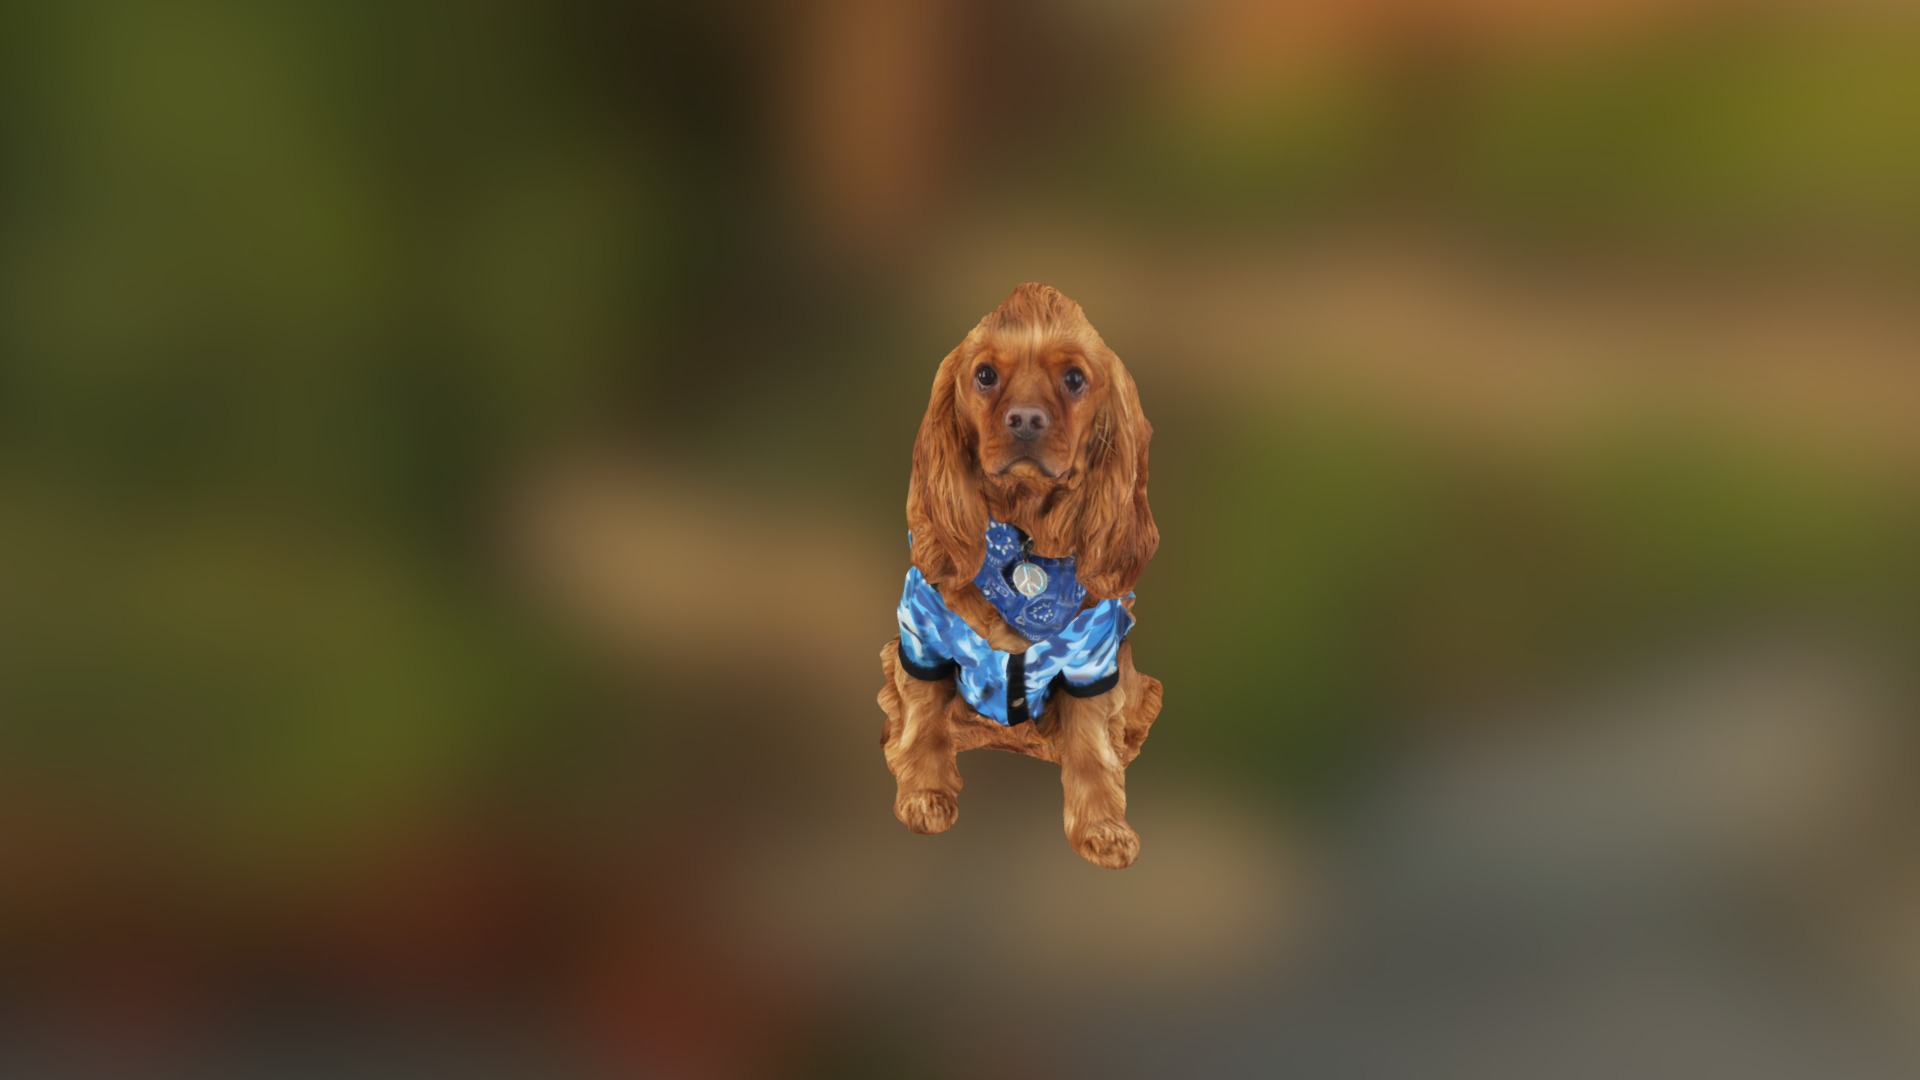 3D model Kofi - This is a 3D model of the Kofi. The 3D model is about a dog wearing a blue shirt.